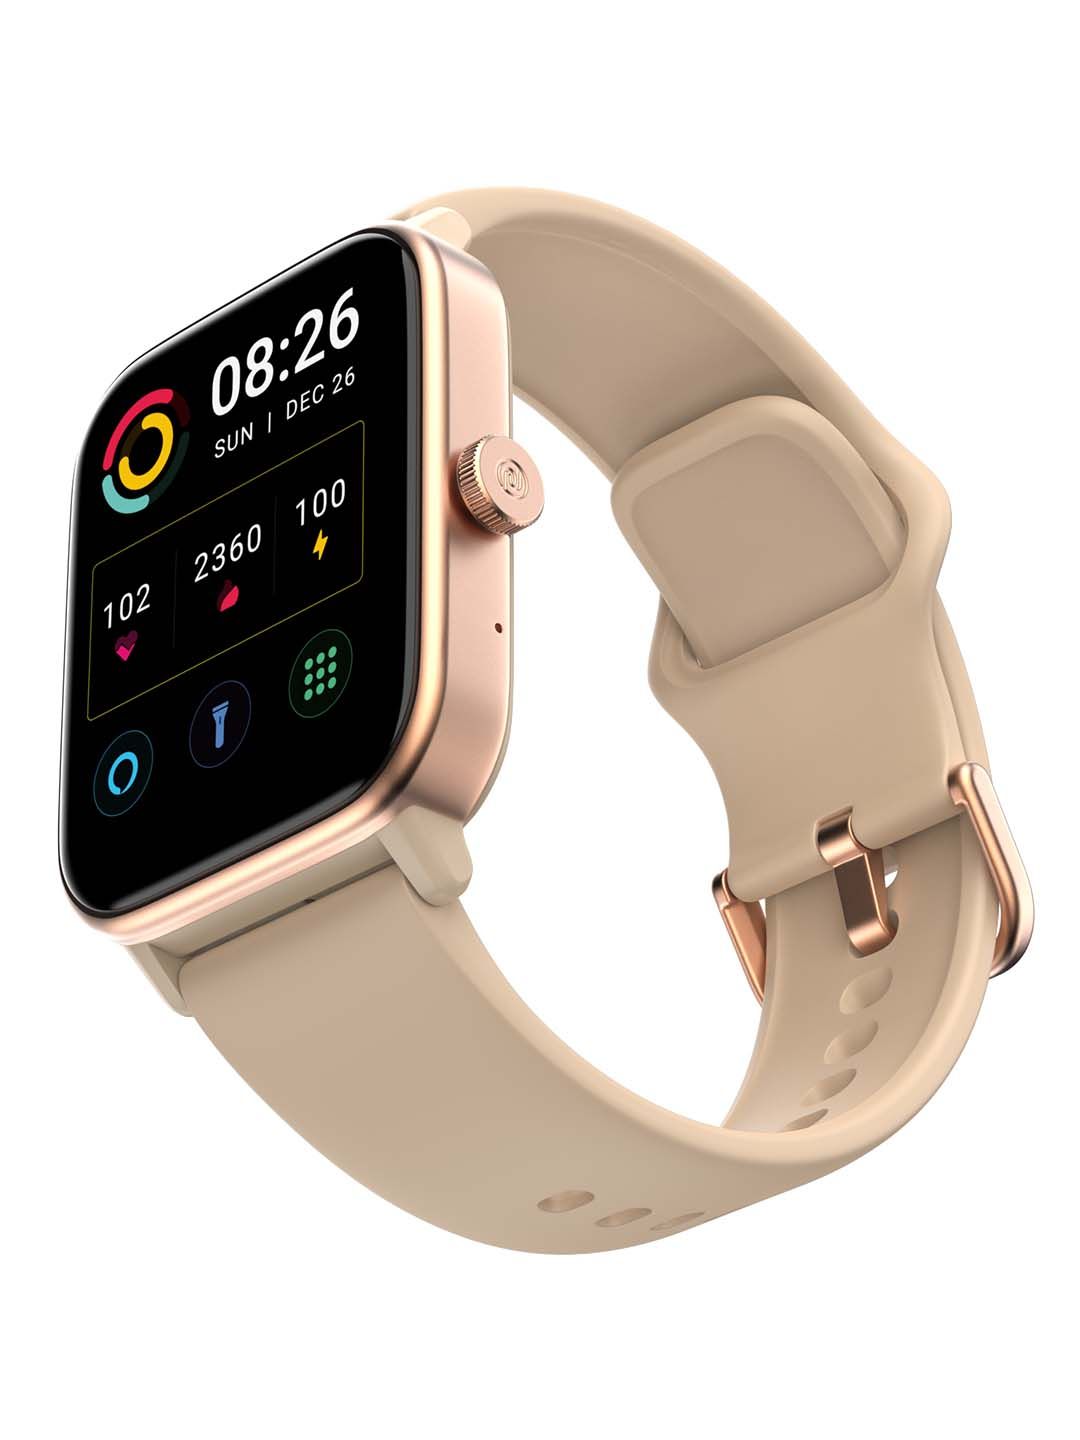 NOISE ColorFit Pro 4 Max Smartwatch - Beige Price in India